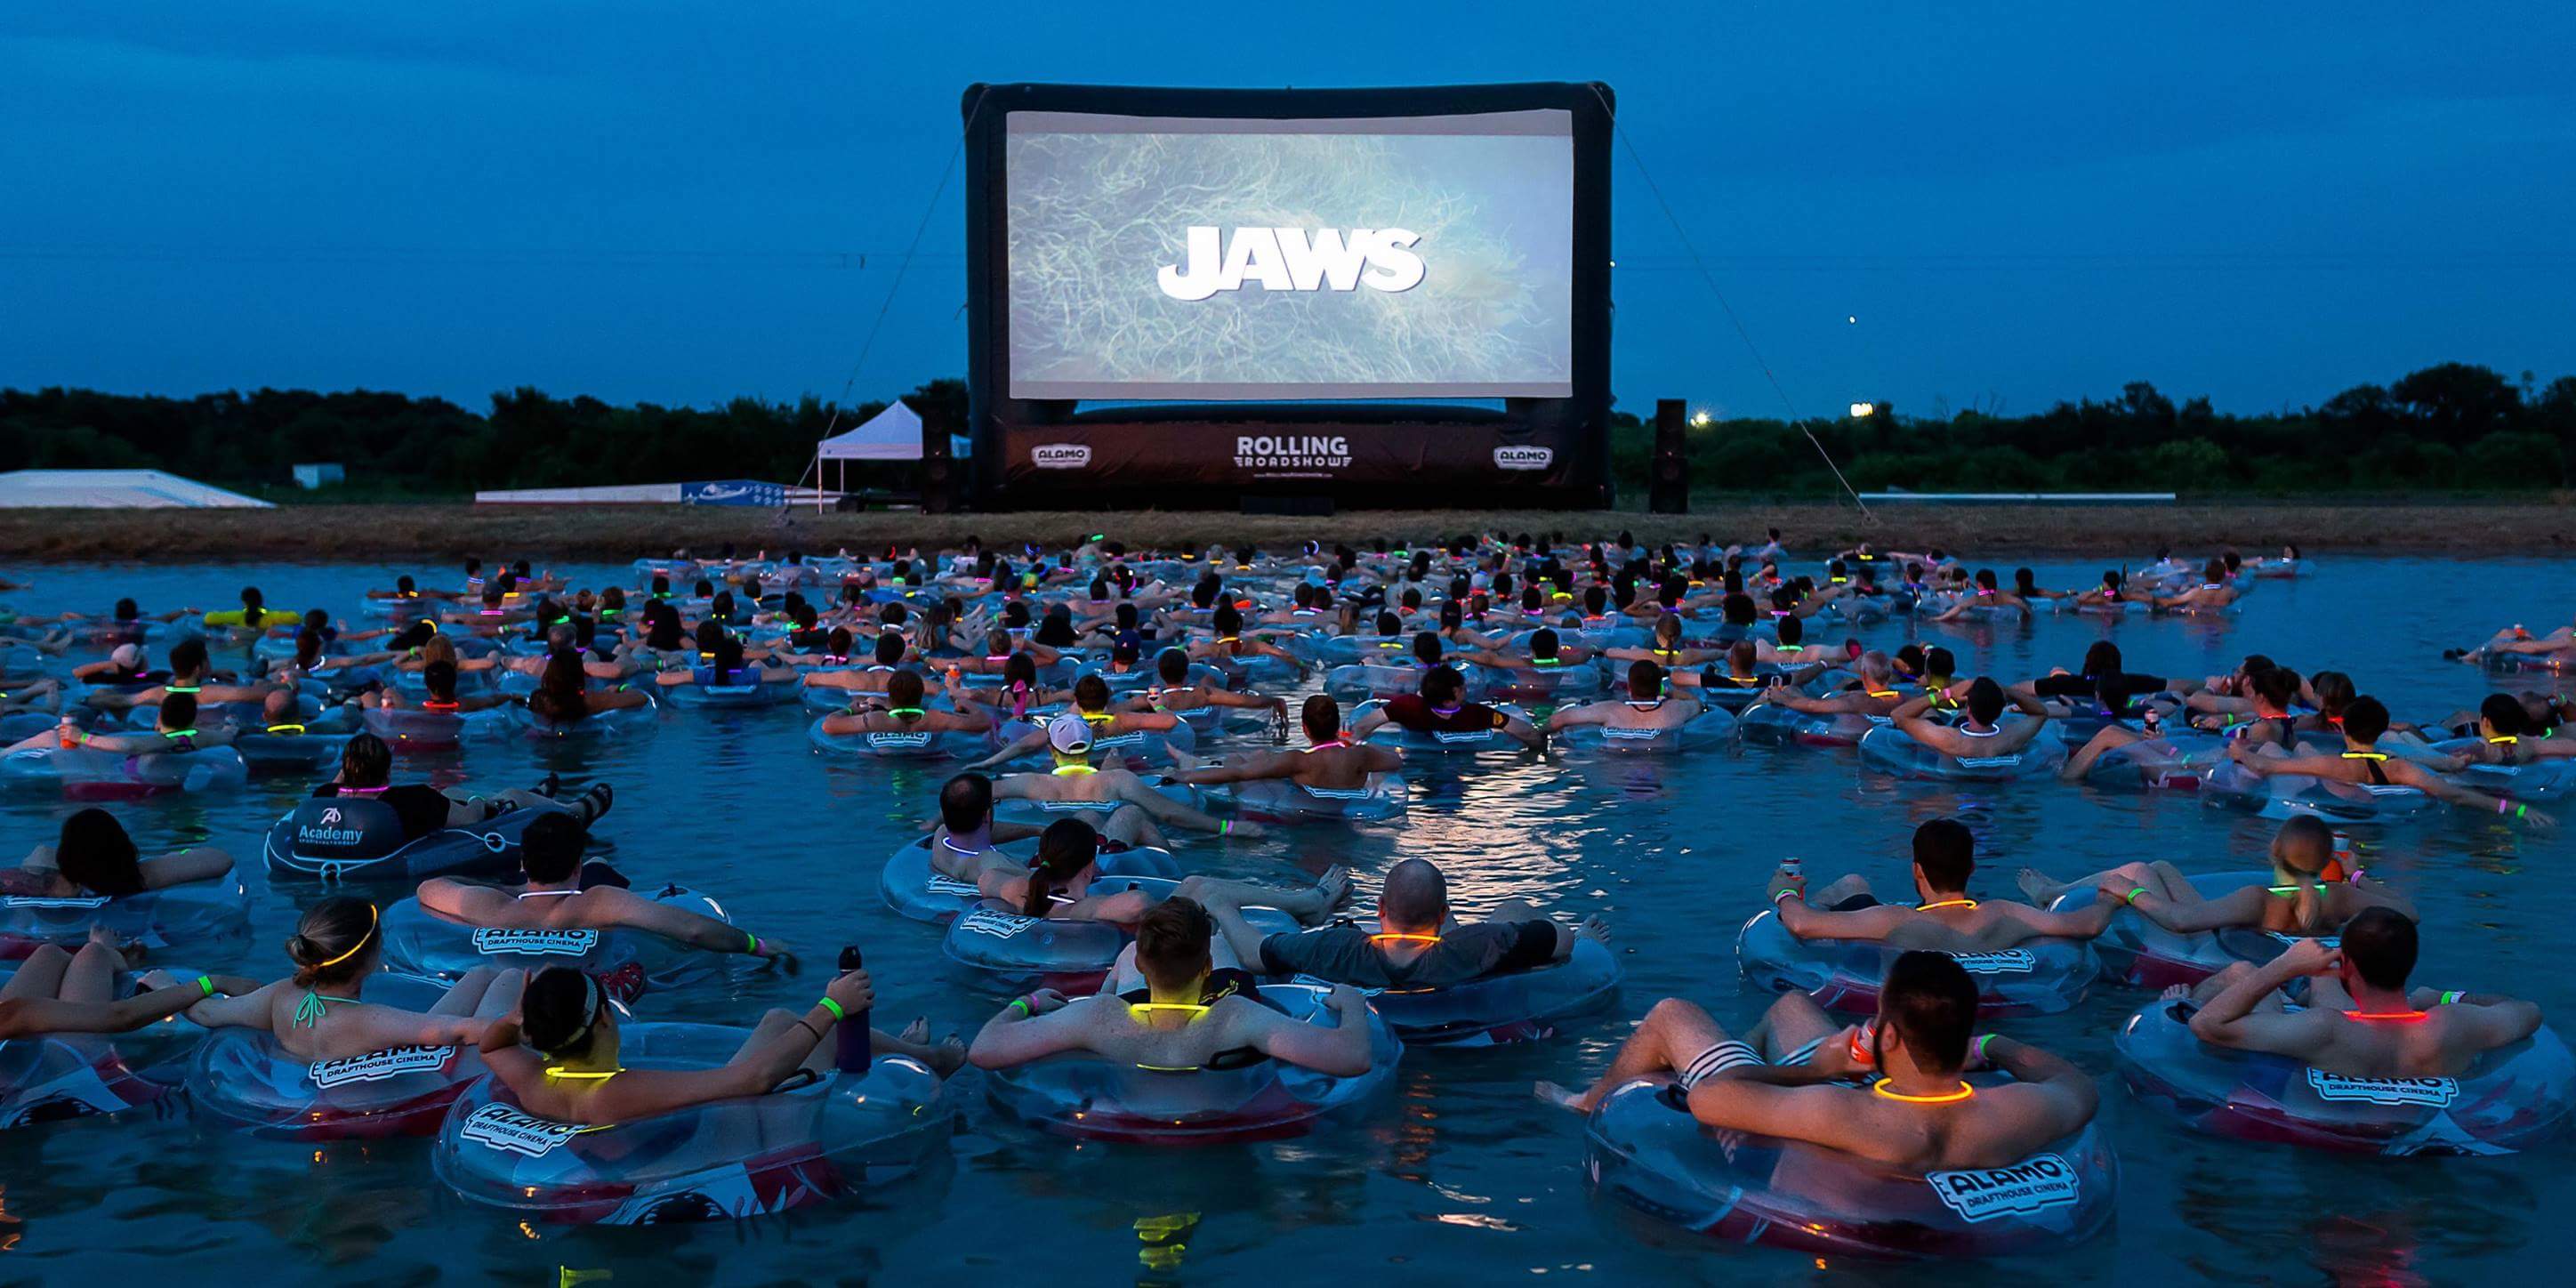 Watch 'Jaws' with your feet dangling in the water